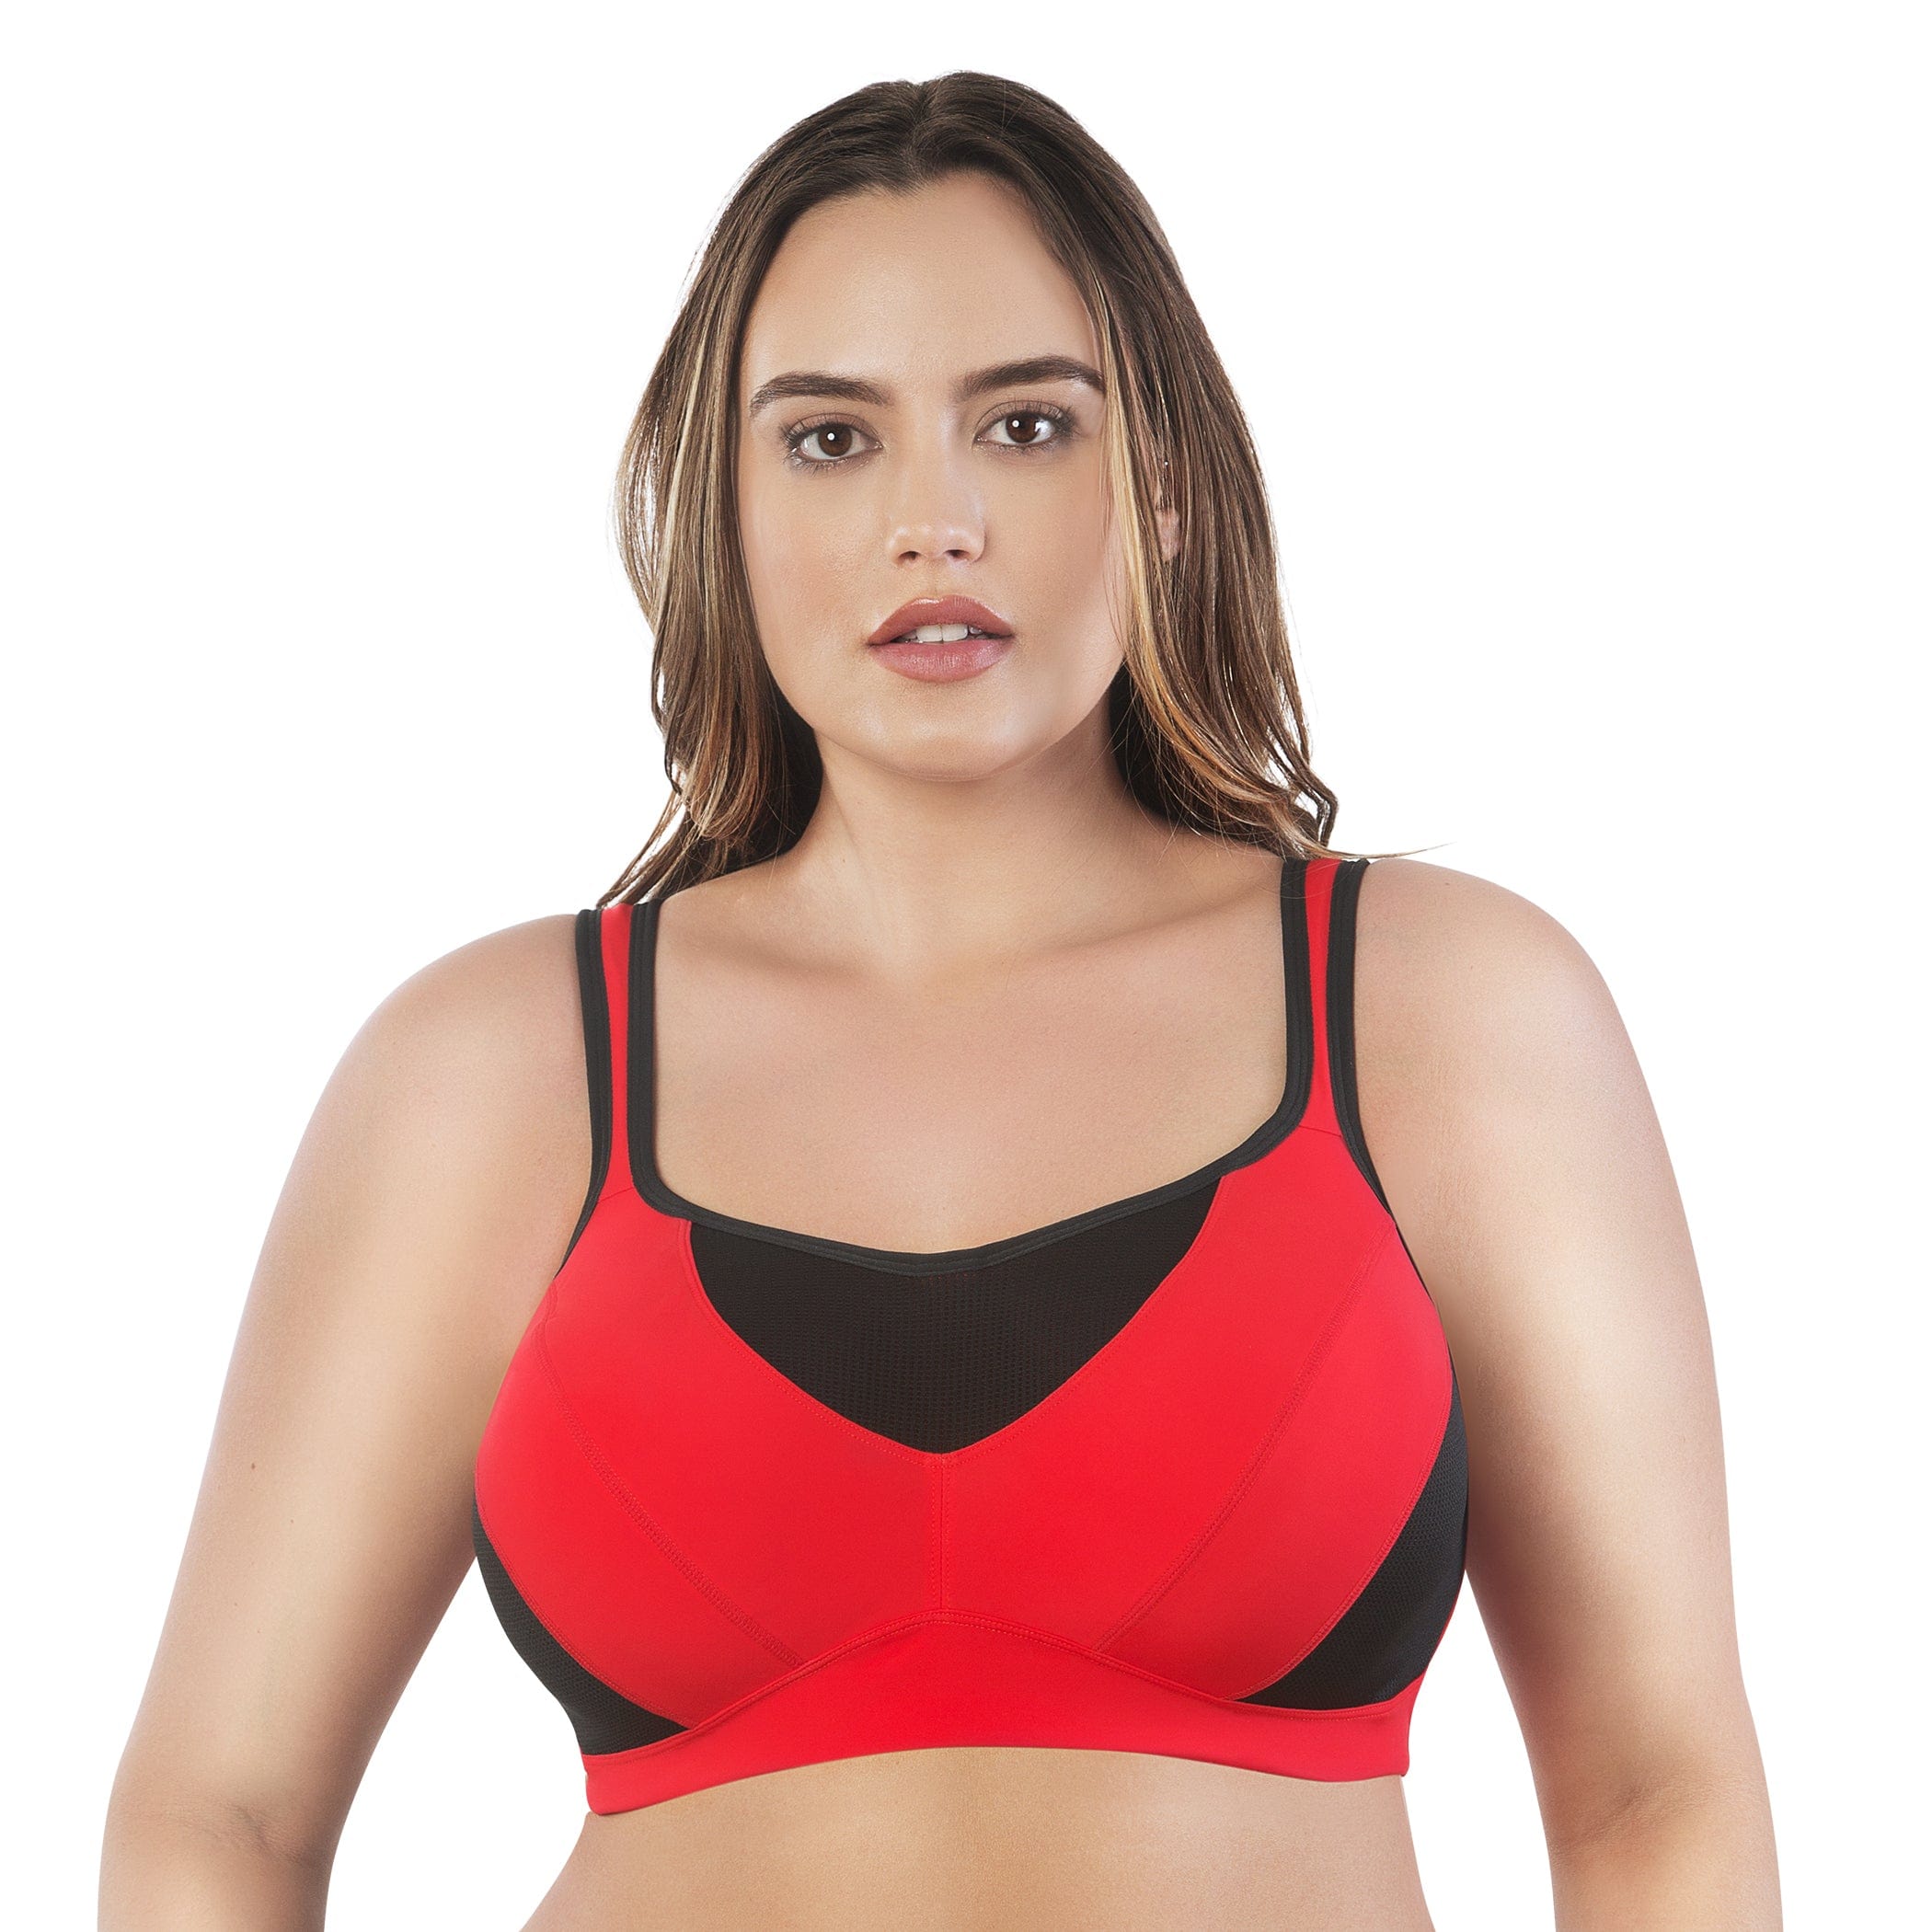 RED ROSE RACER BACK MEDIUM IMPACT COTTON BRA WIREFREE & HIGH COVERAGE